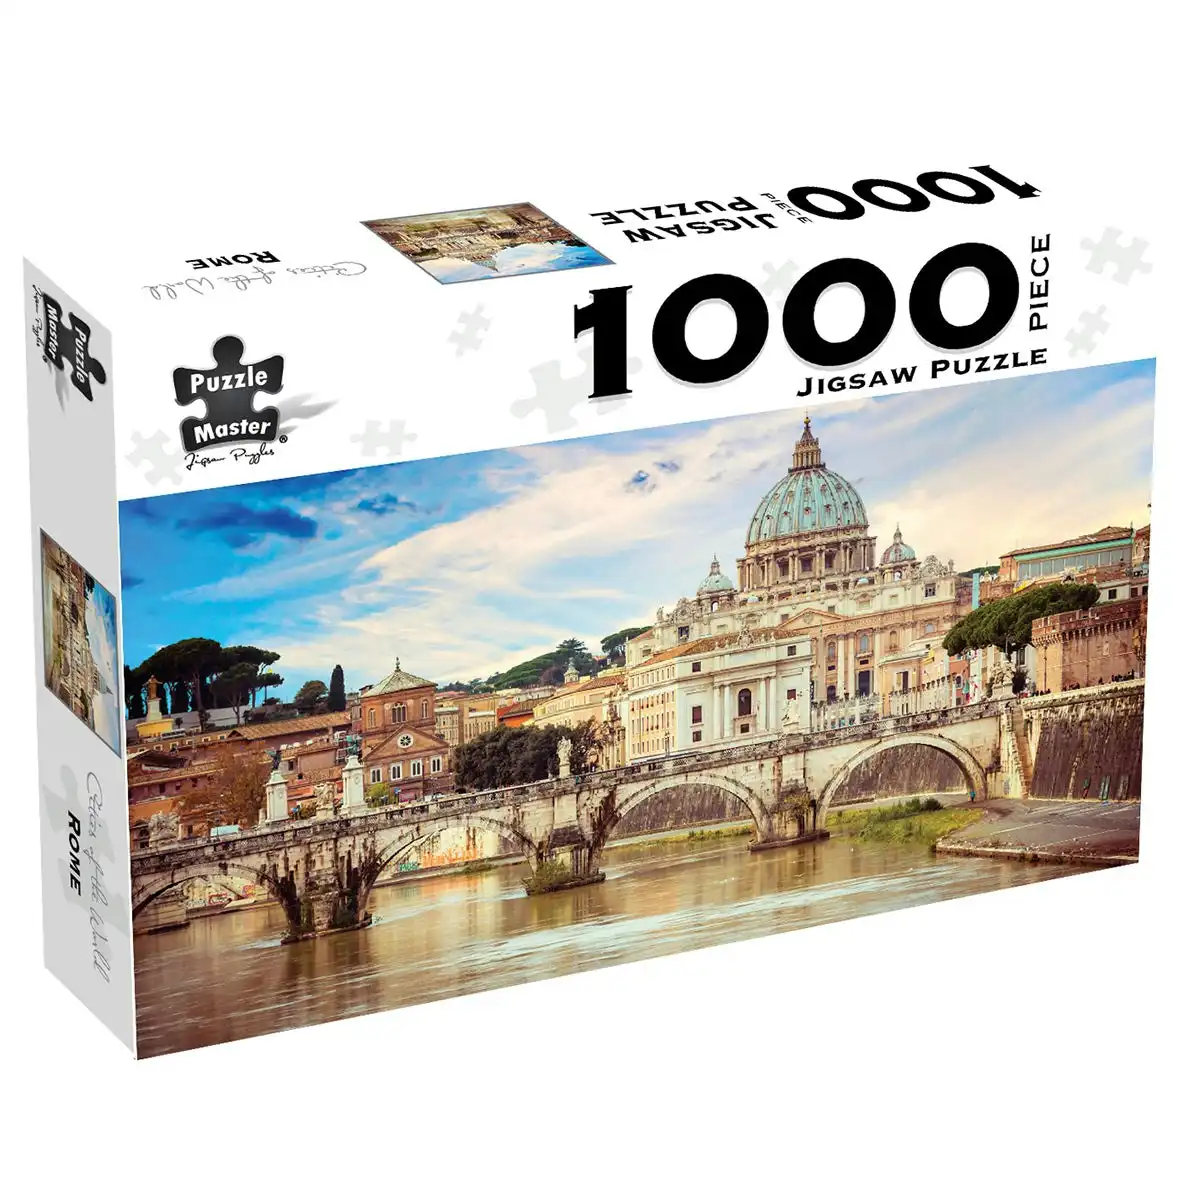 Puzzle Master 1000-Piece Jigsaw Puzzle, Cities of the World Rome